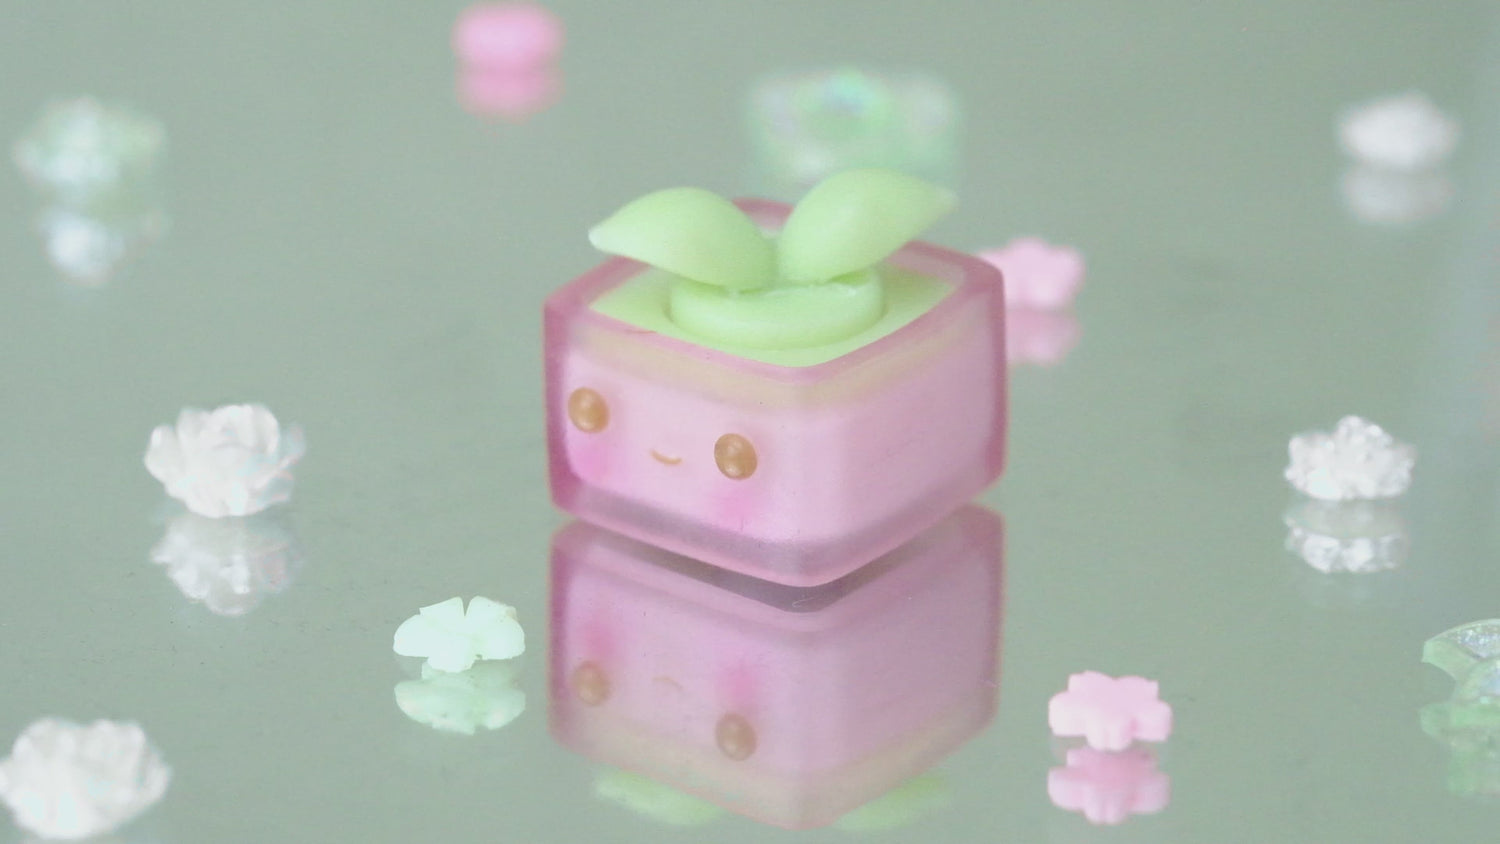 Lolicaps x Sparkle Sprout Resin Artisan Keycap